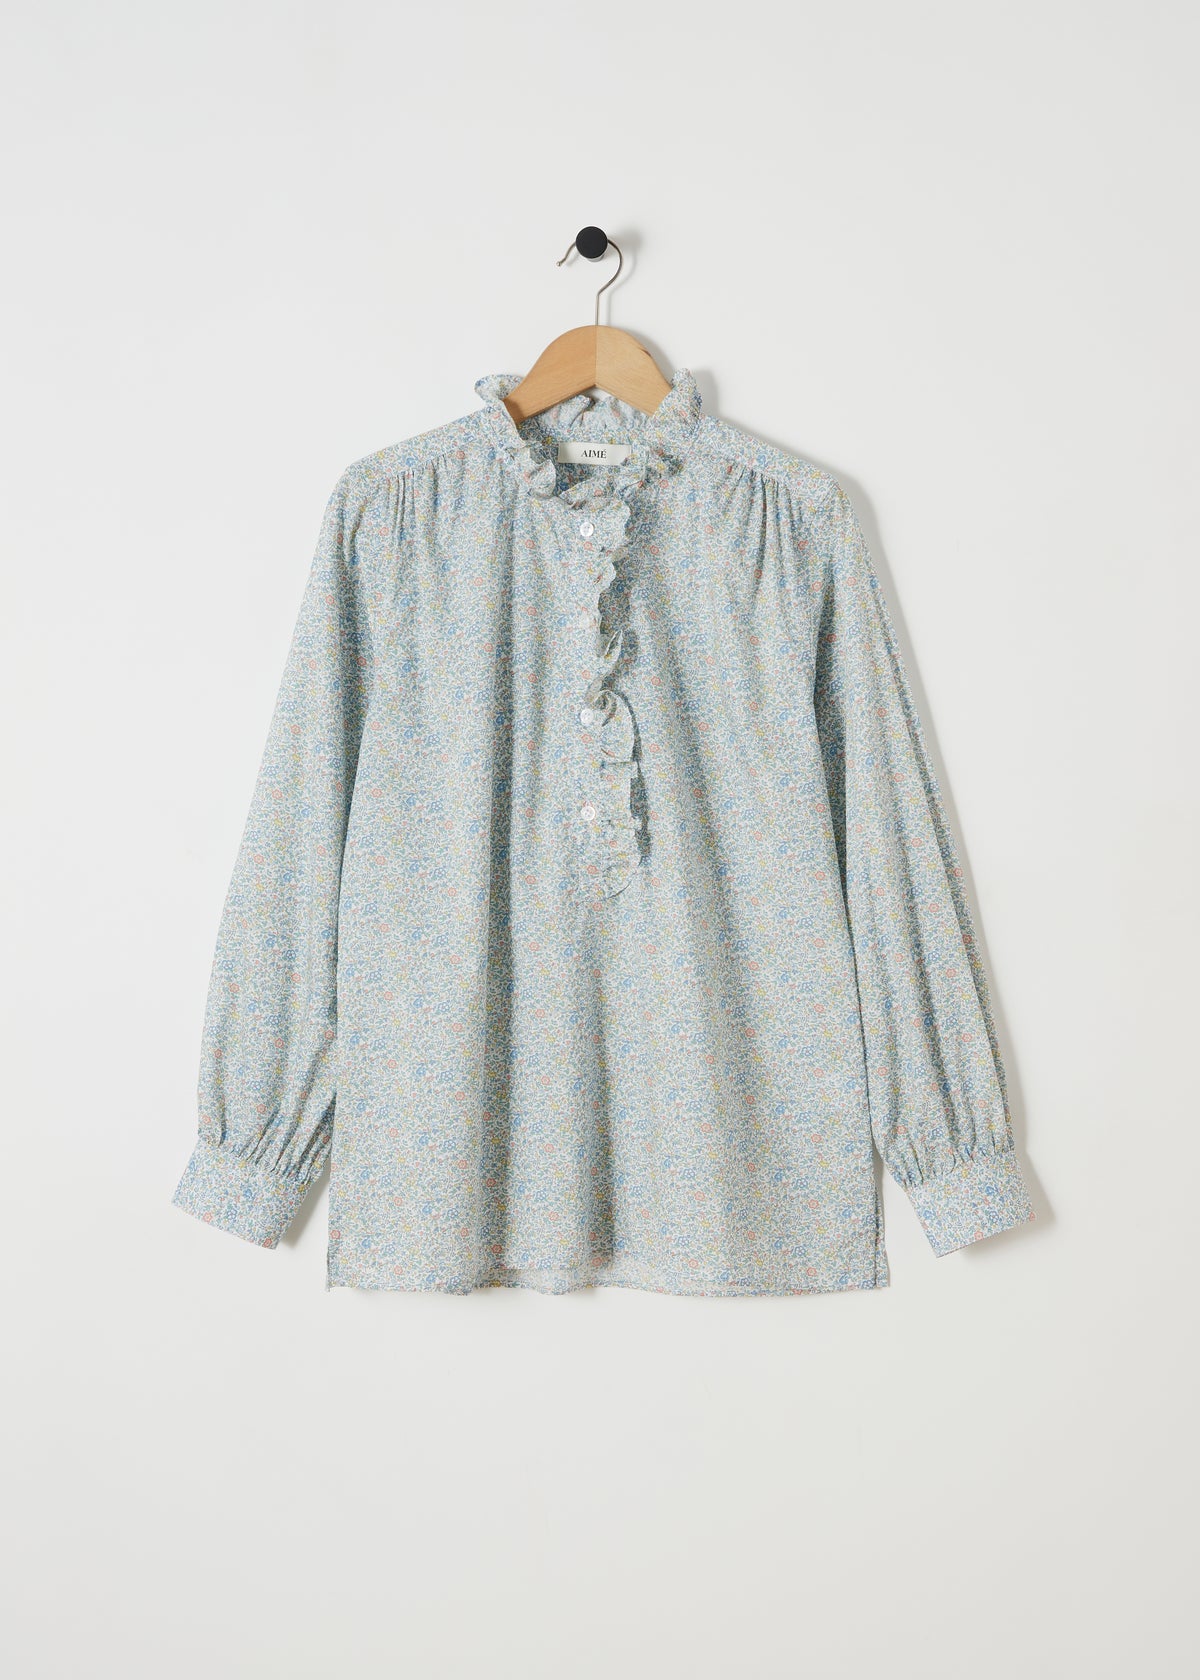 ALMA SHIRT — Made with Katie & Millie Tana Lawn™ Blue